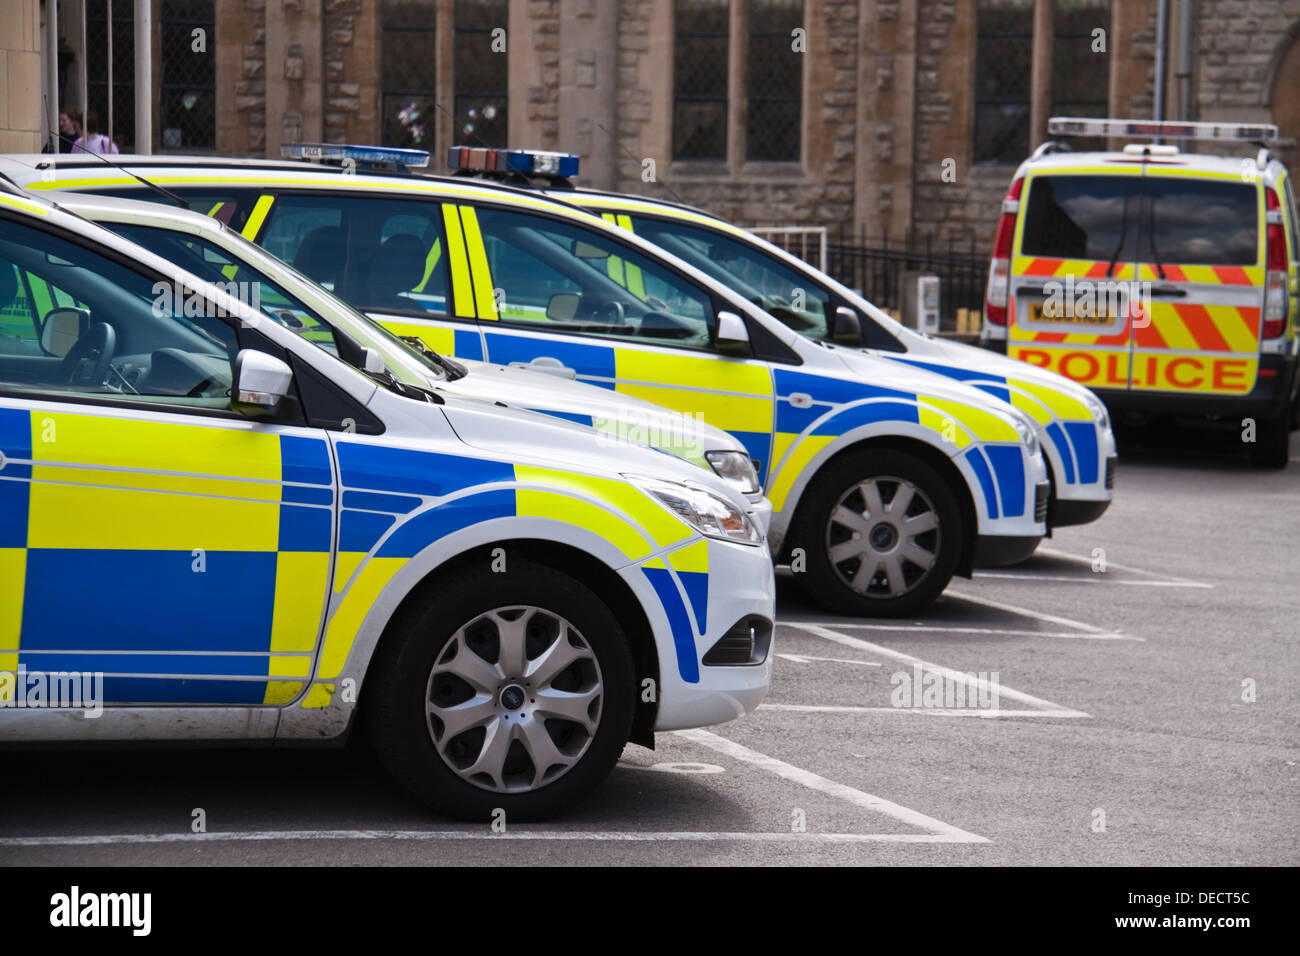 Row of police cars parked outside police station in Bath, UK Stock Photo